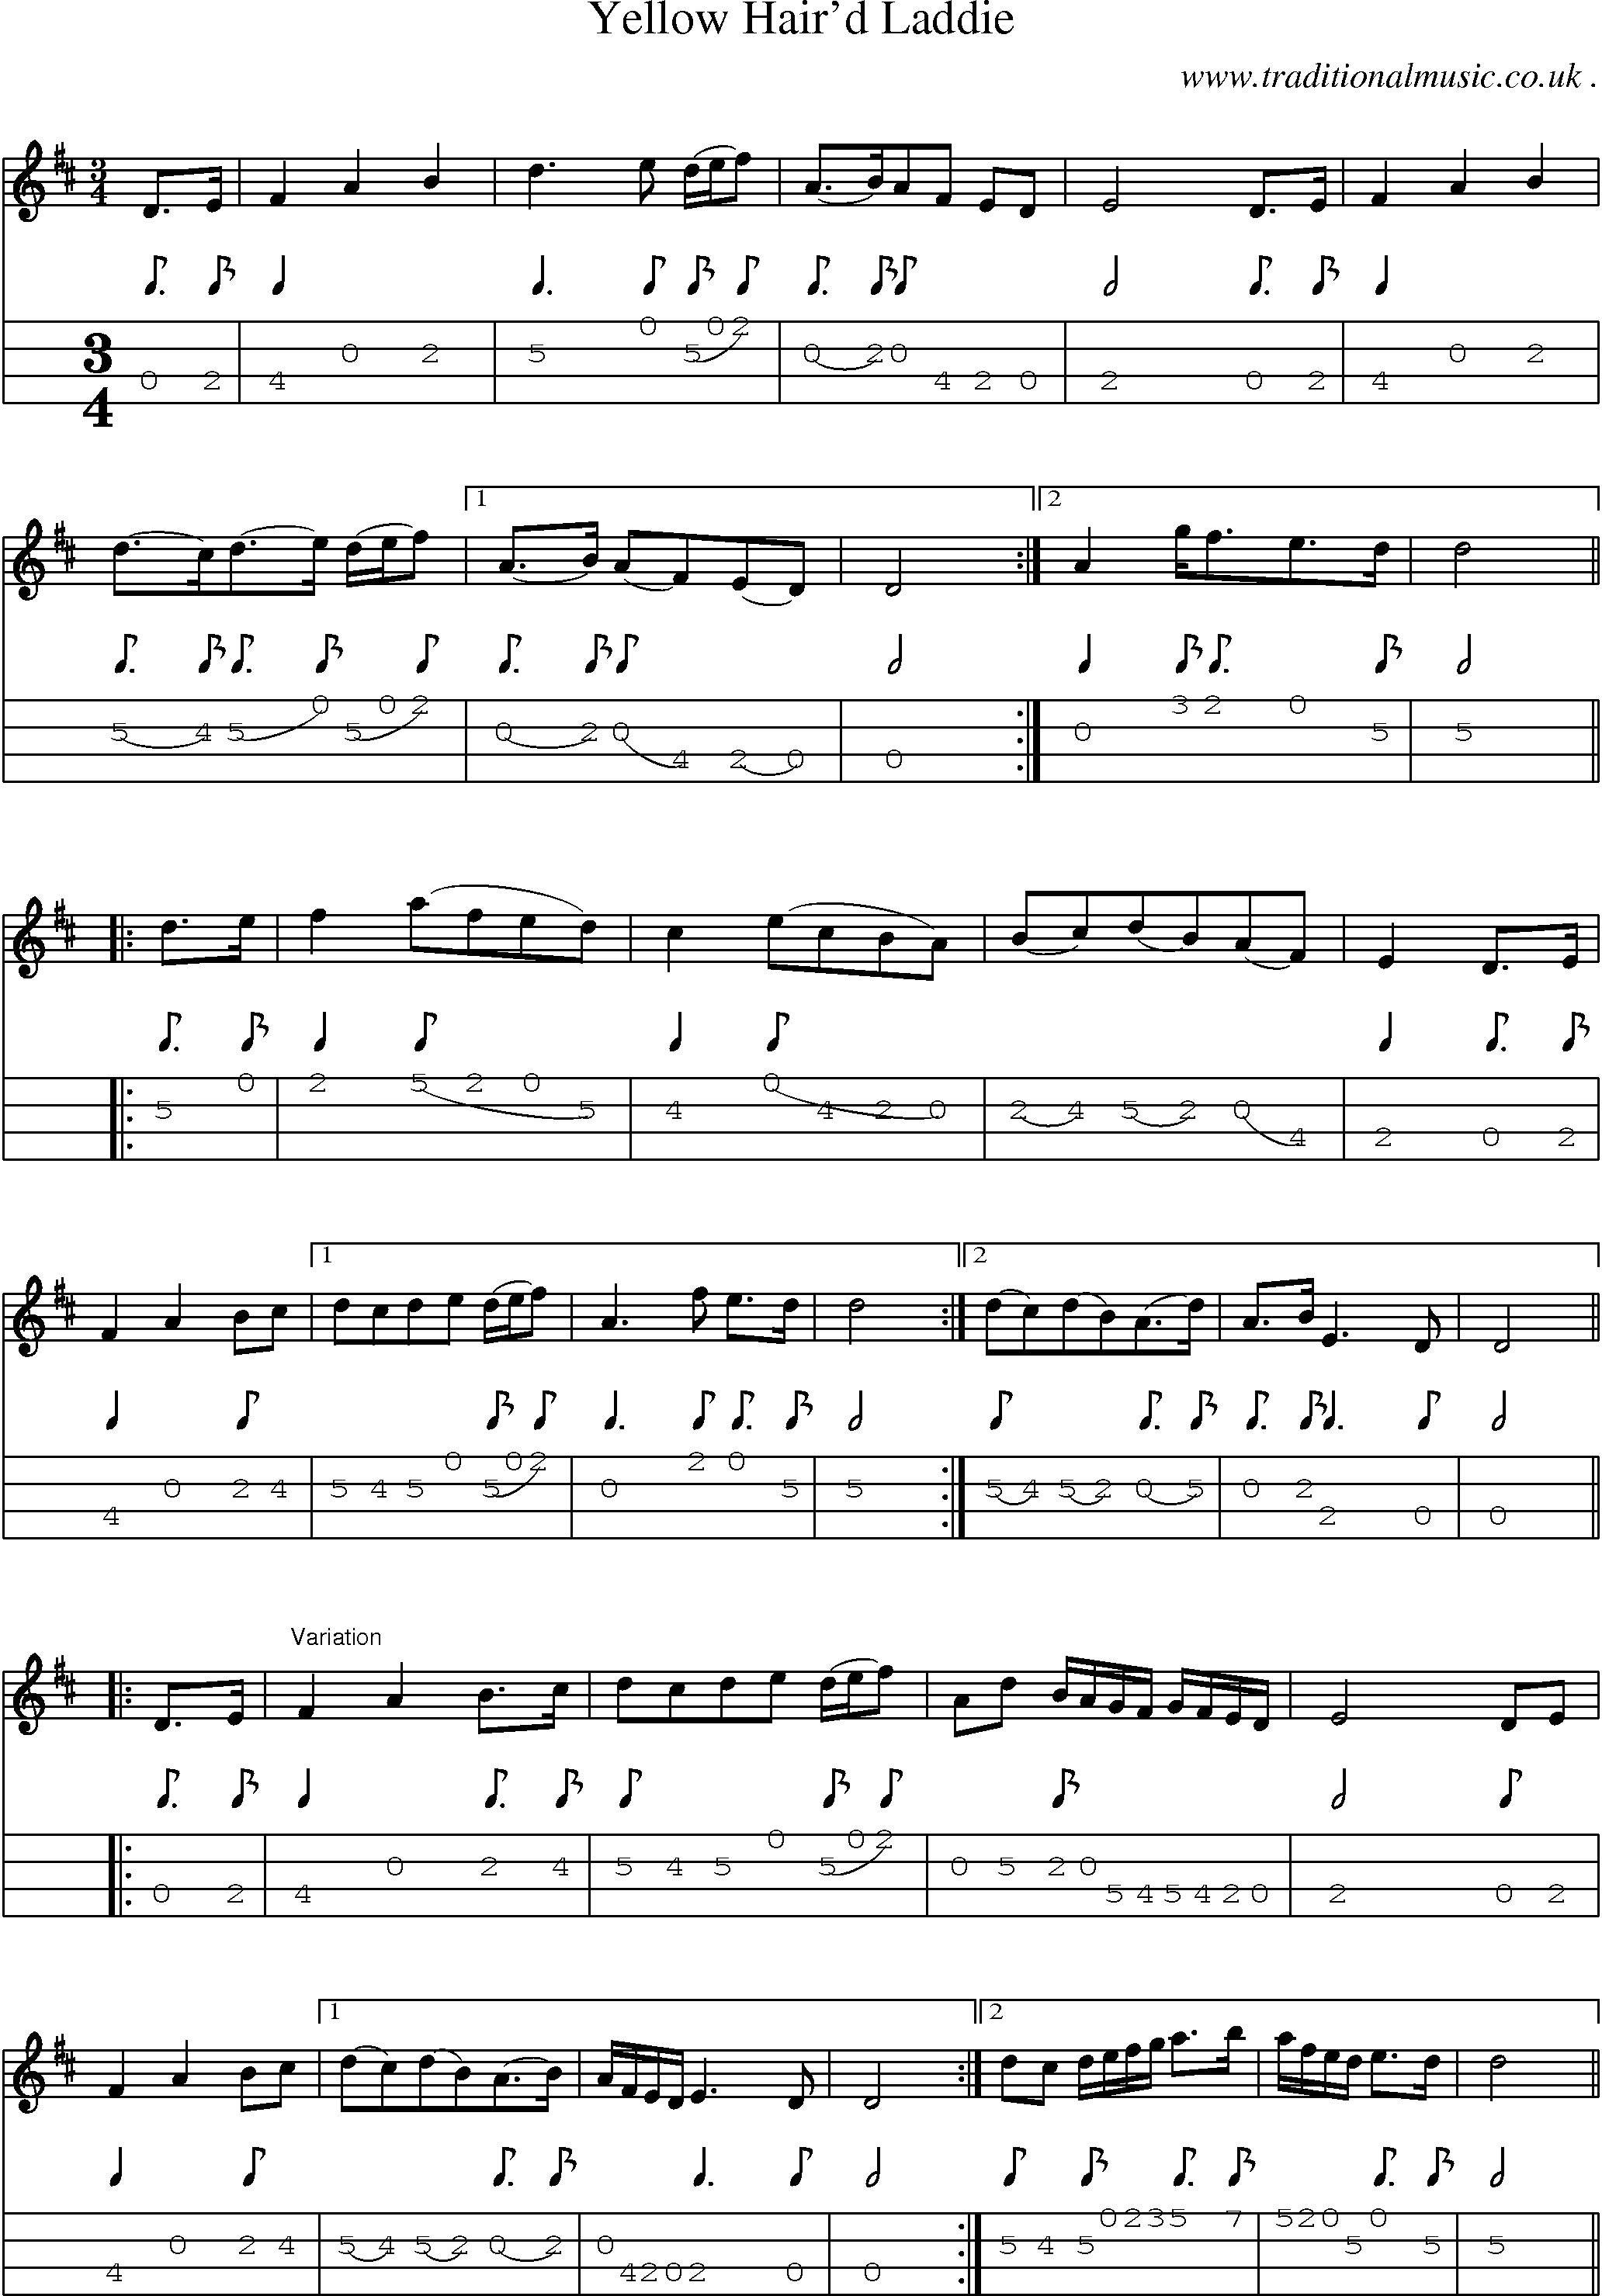 Sheet-Music and Mandolin Tabs for Yellow Haird Laddie